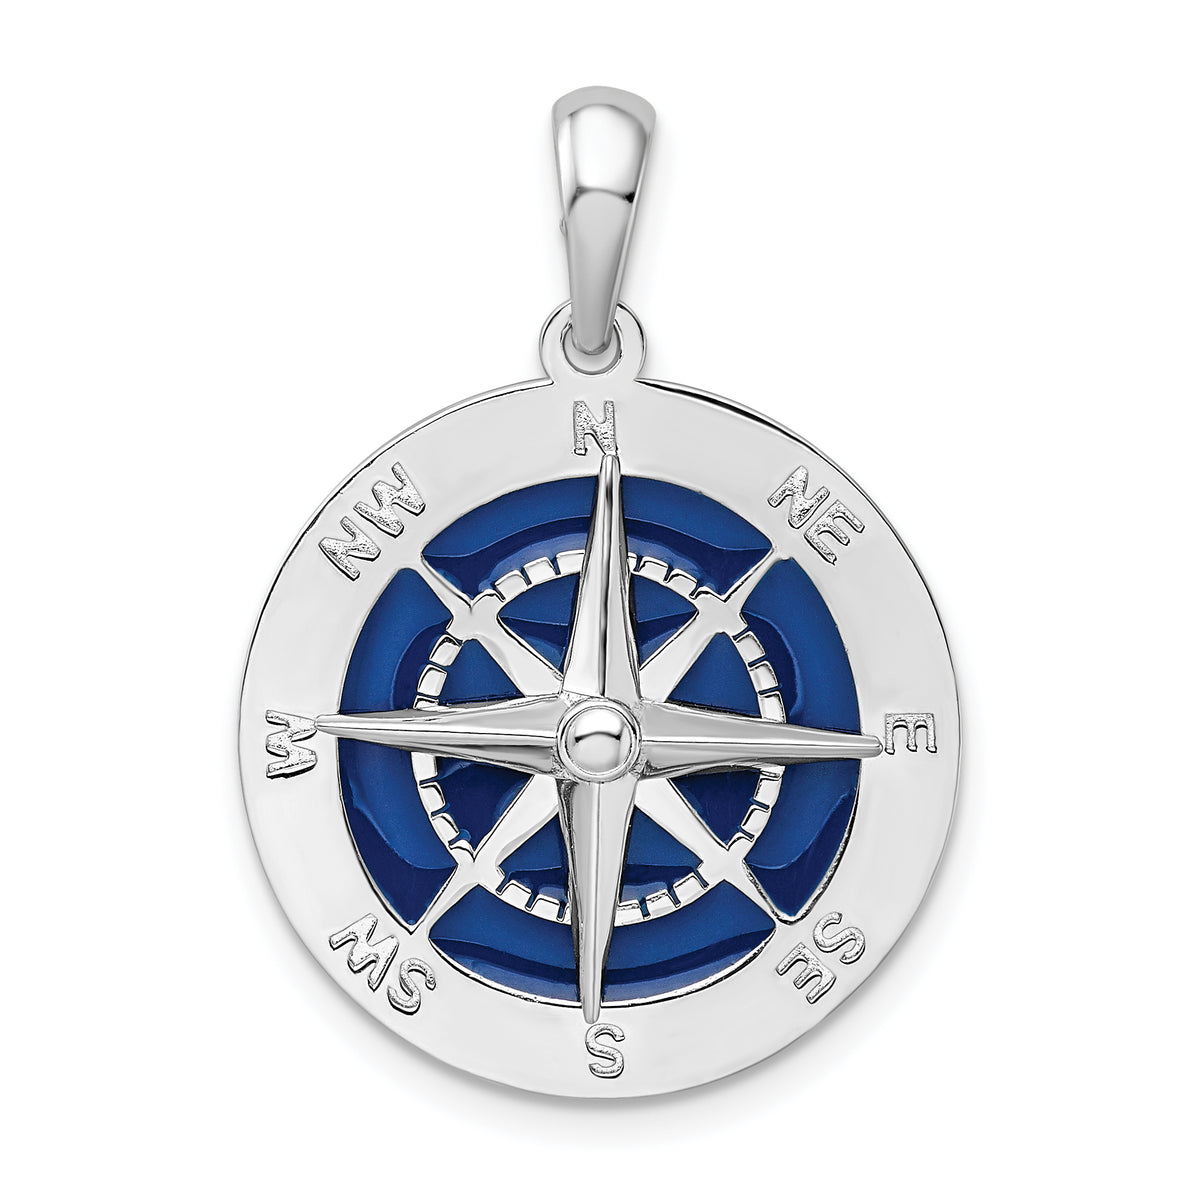 De-Ani Sterling Silver Rhodium-Plated Polished Enameled Large Compass Pendant